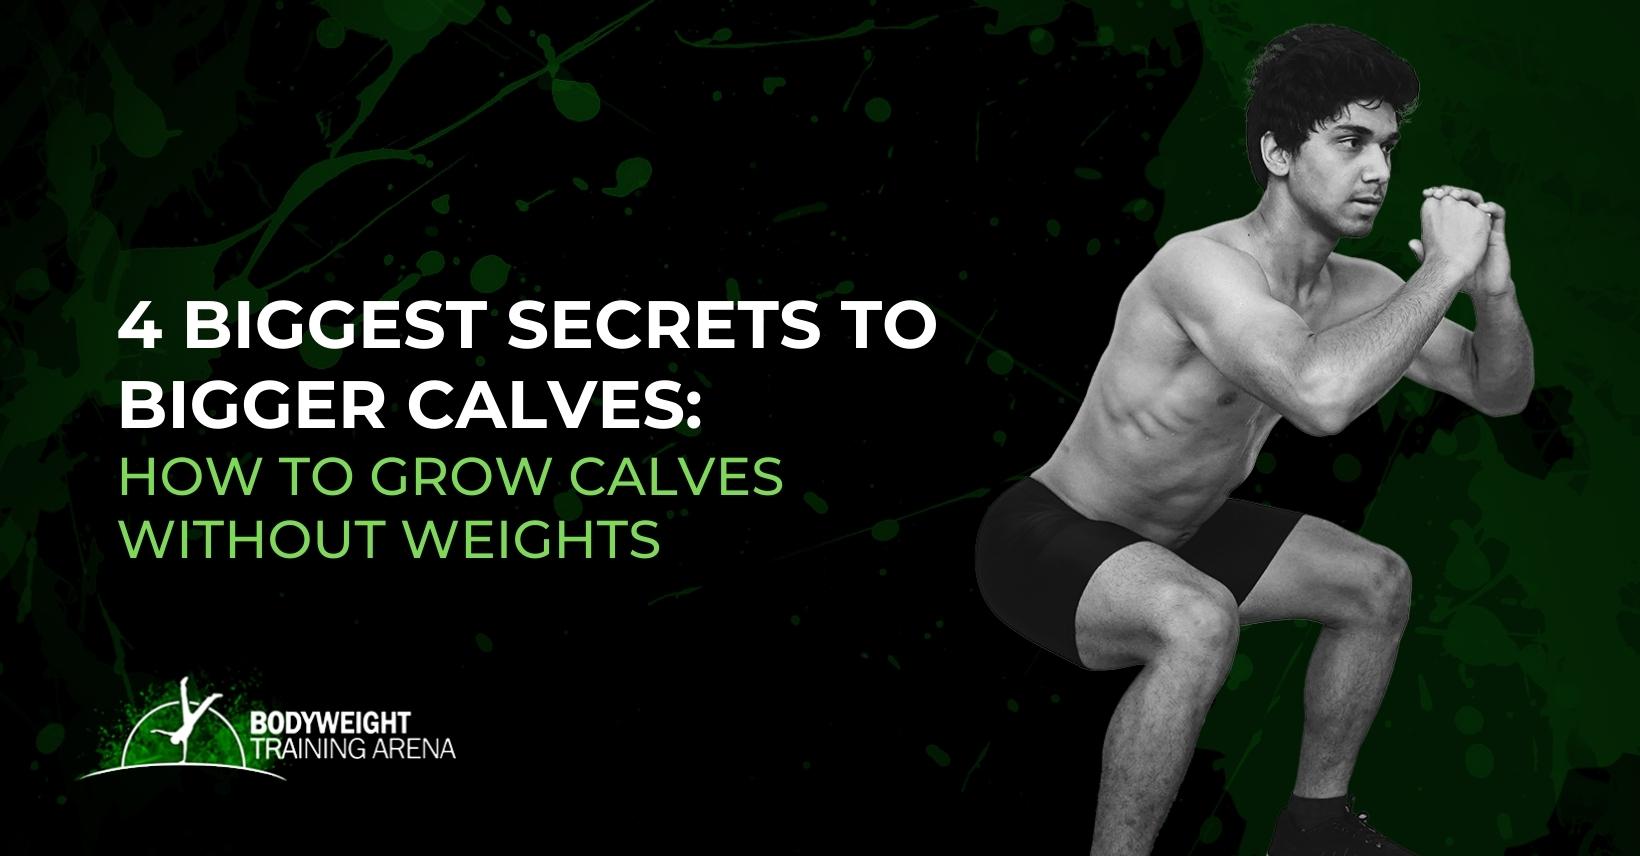 4 Biggest Secrets to Bigger Calves: How to Grow Calves without Weights